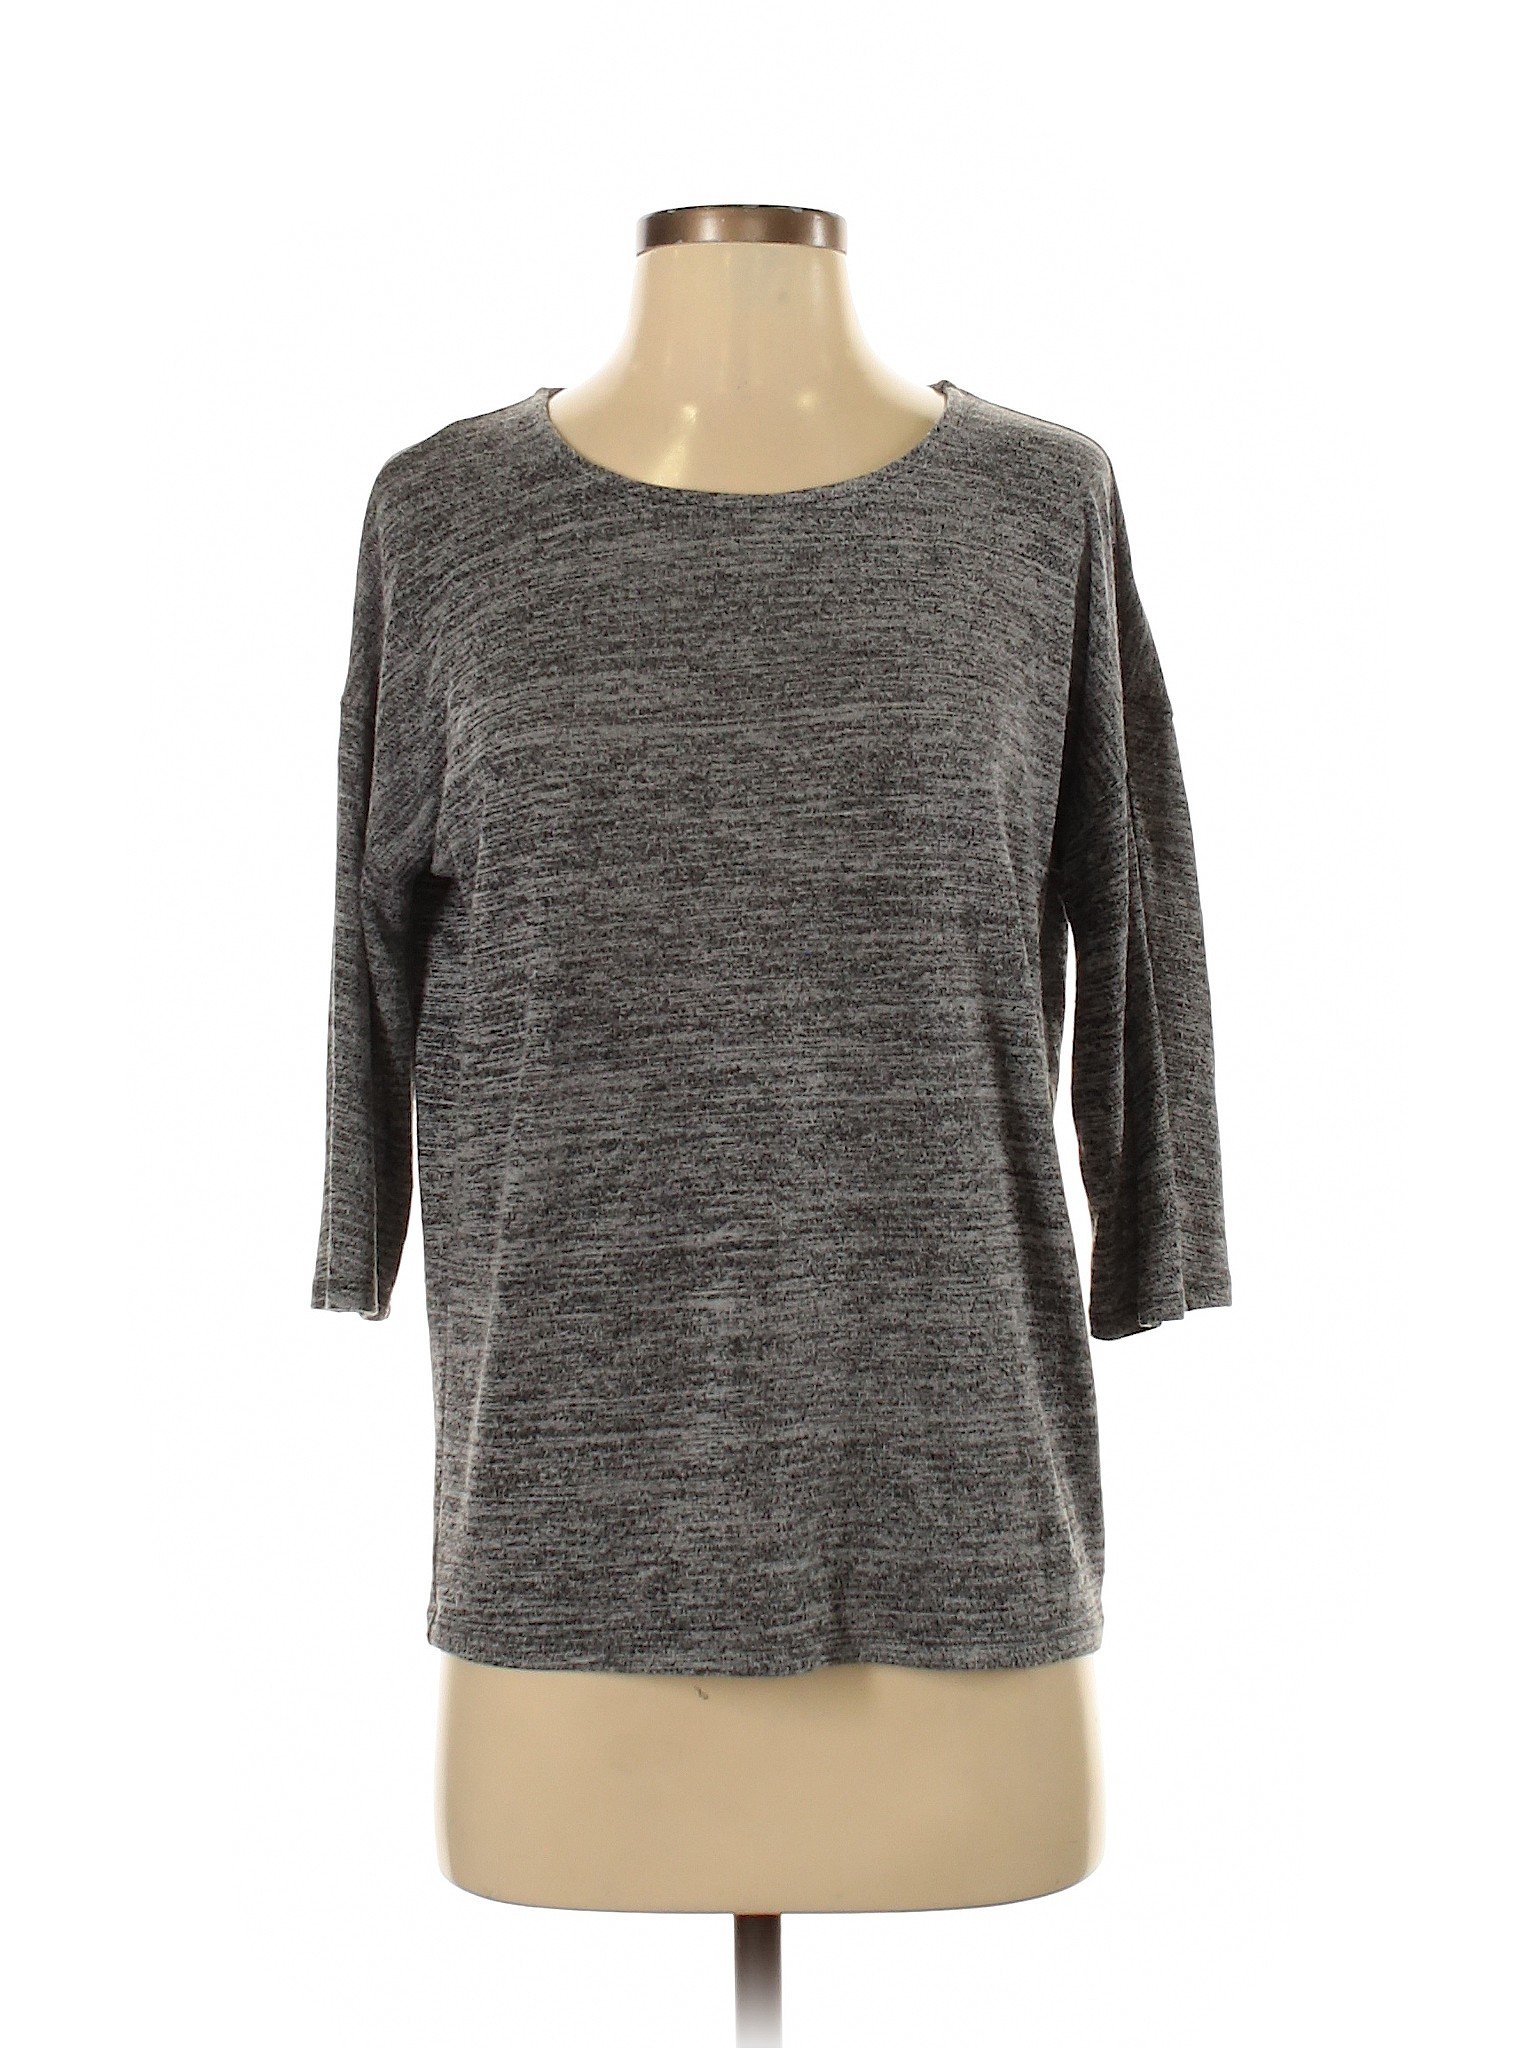 The Limited Women Gray 3/4 Sleeve Top S | eBay